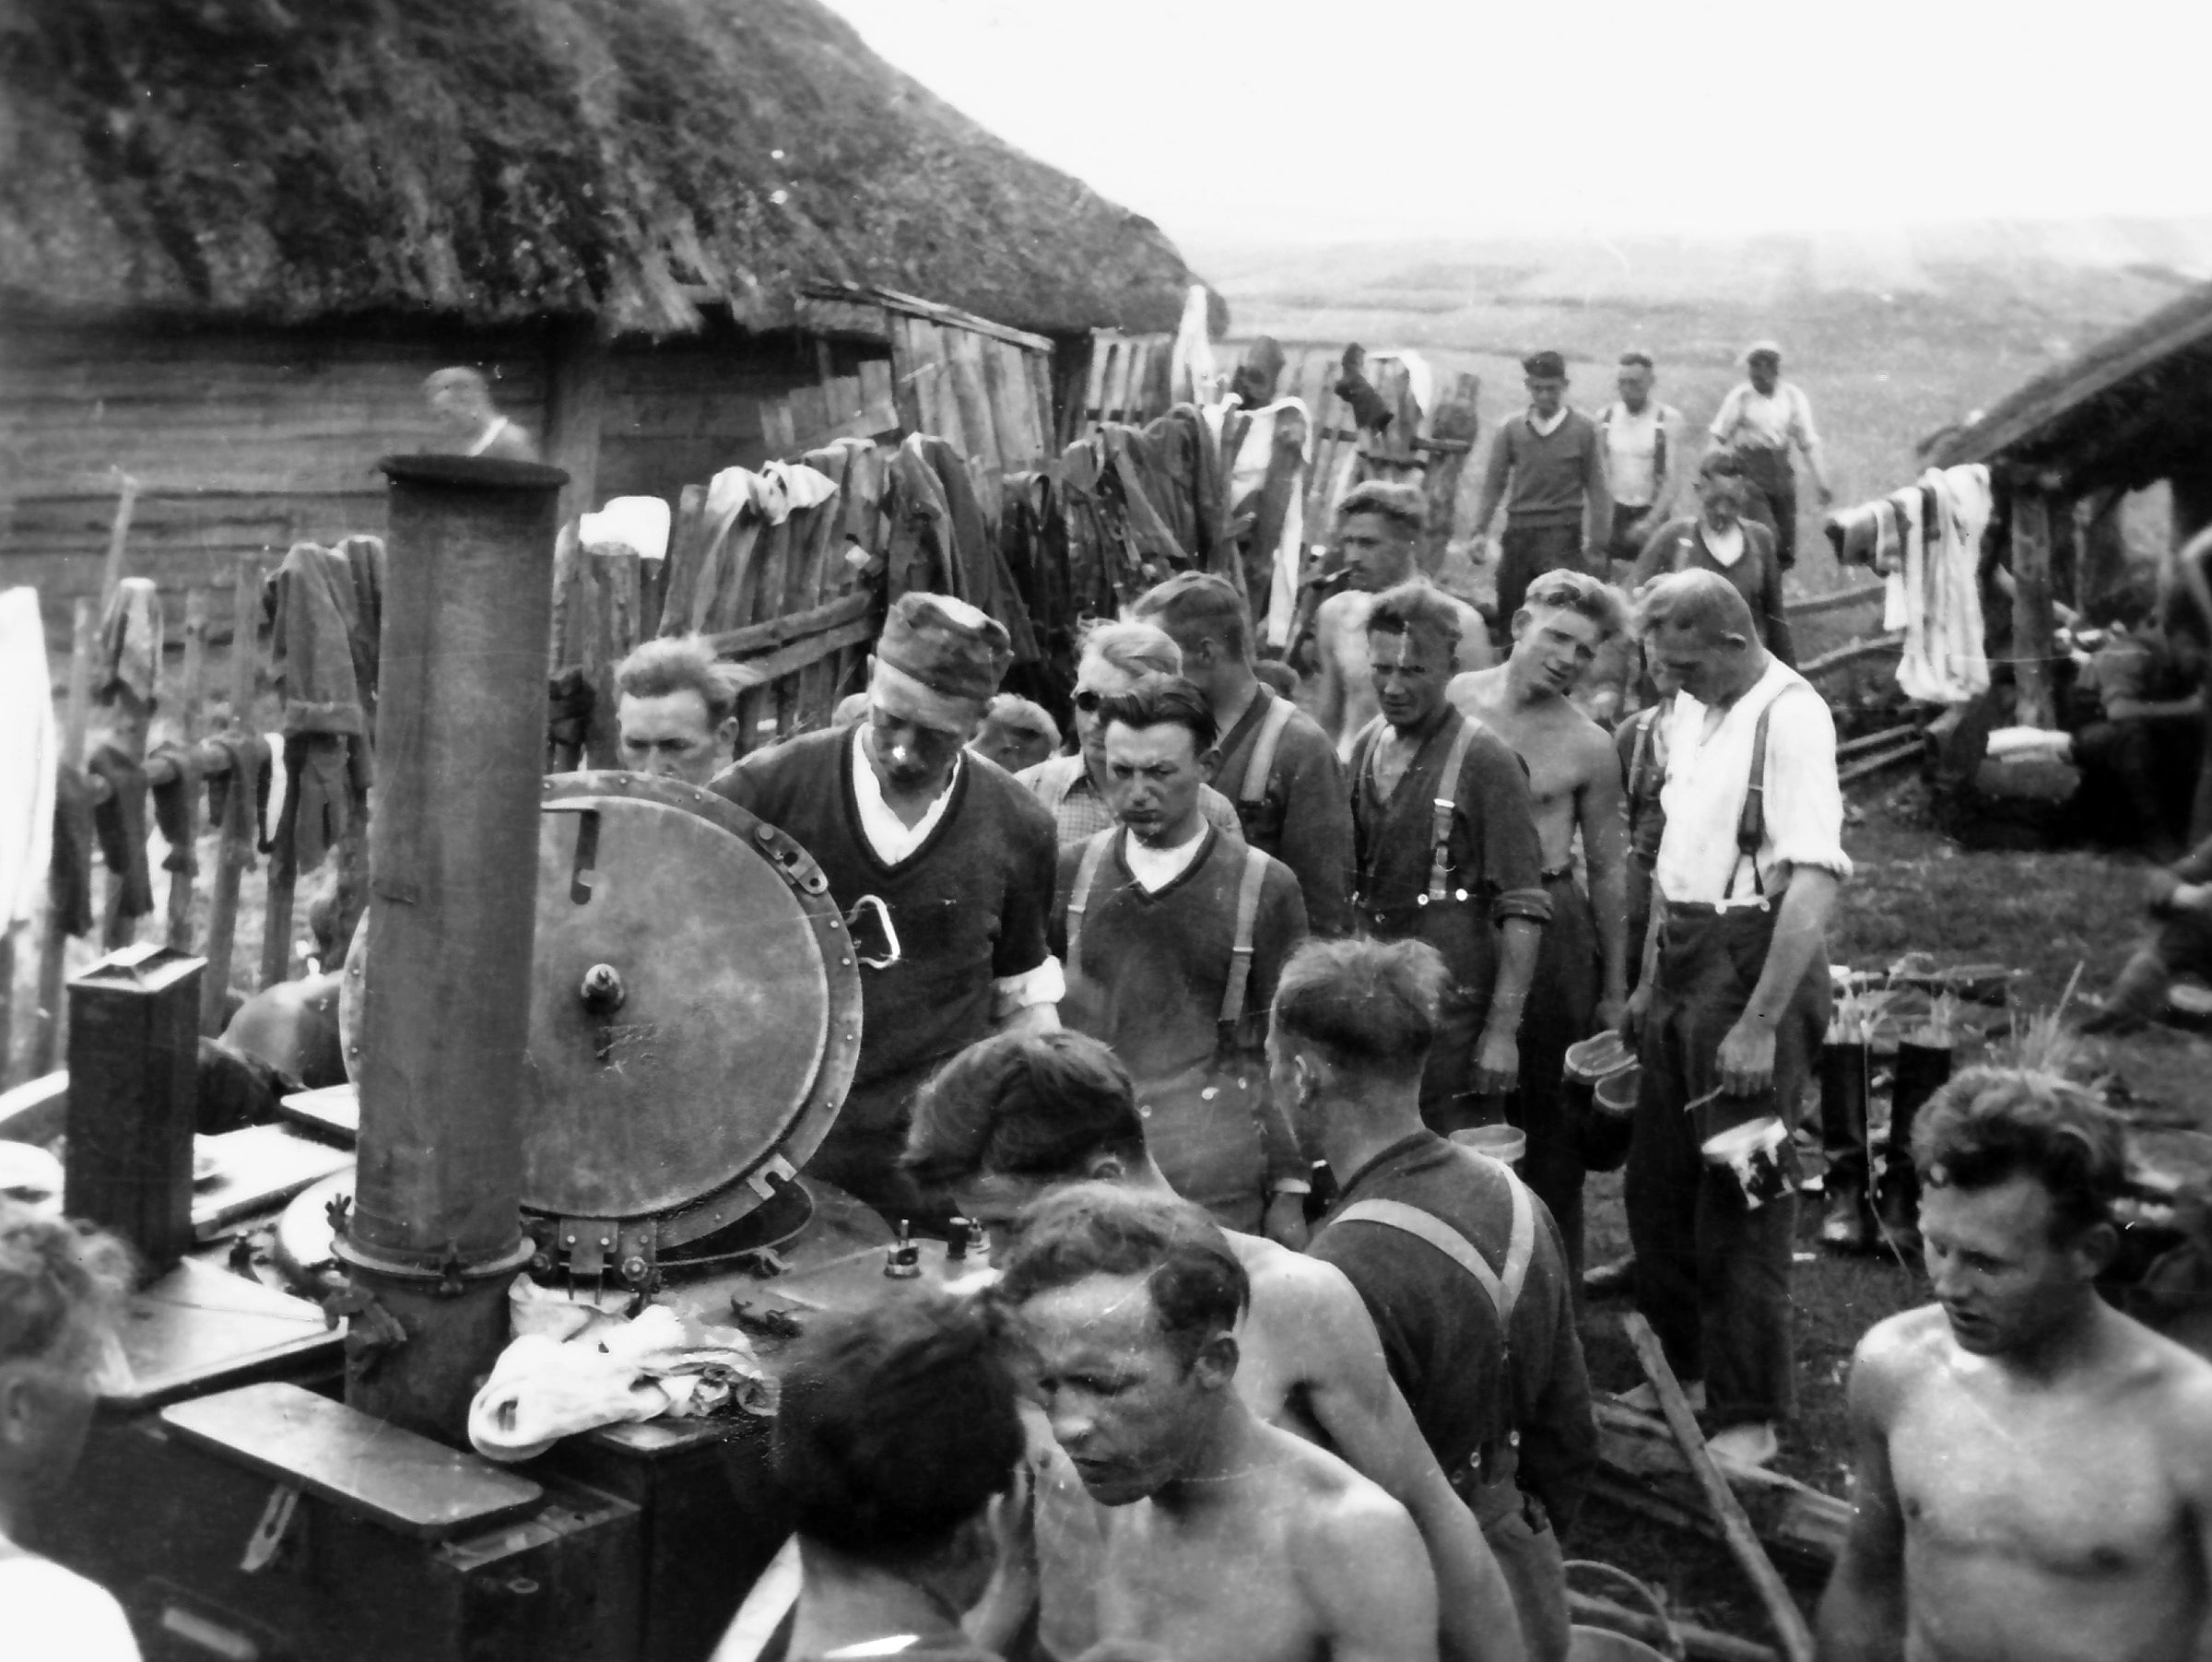 Somewhere on the Russian front, soldiers with less than cheerful anticipation queue up for a meal. Mobile field kitchens could cook while on the move and also featured ovens for baking bread and a means for brewing coffee. The tall stovepipe for venting smoke produced the slang term Goulaschkanone (“goulash cannon”). 